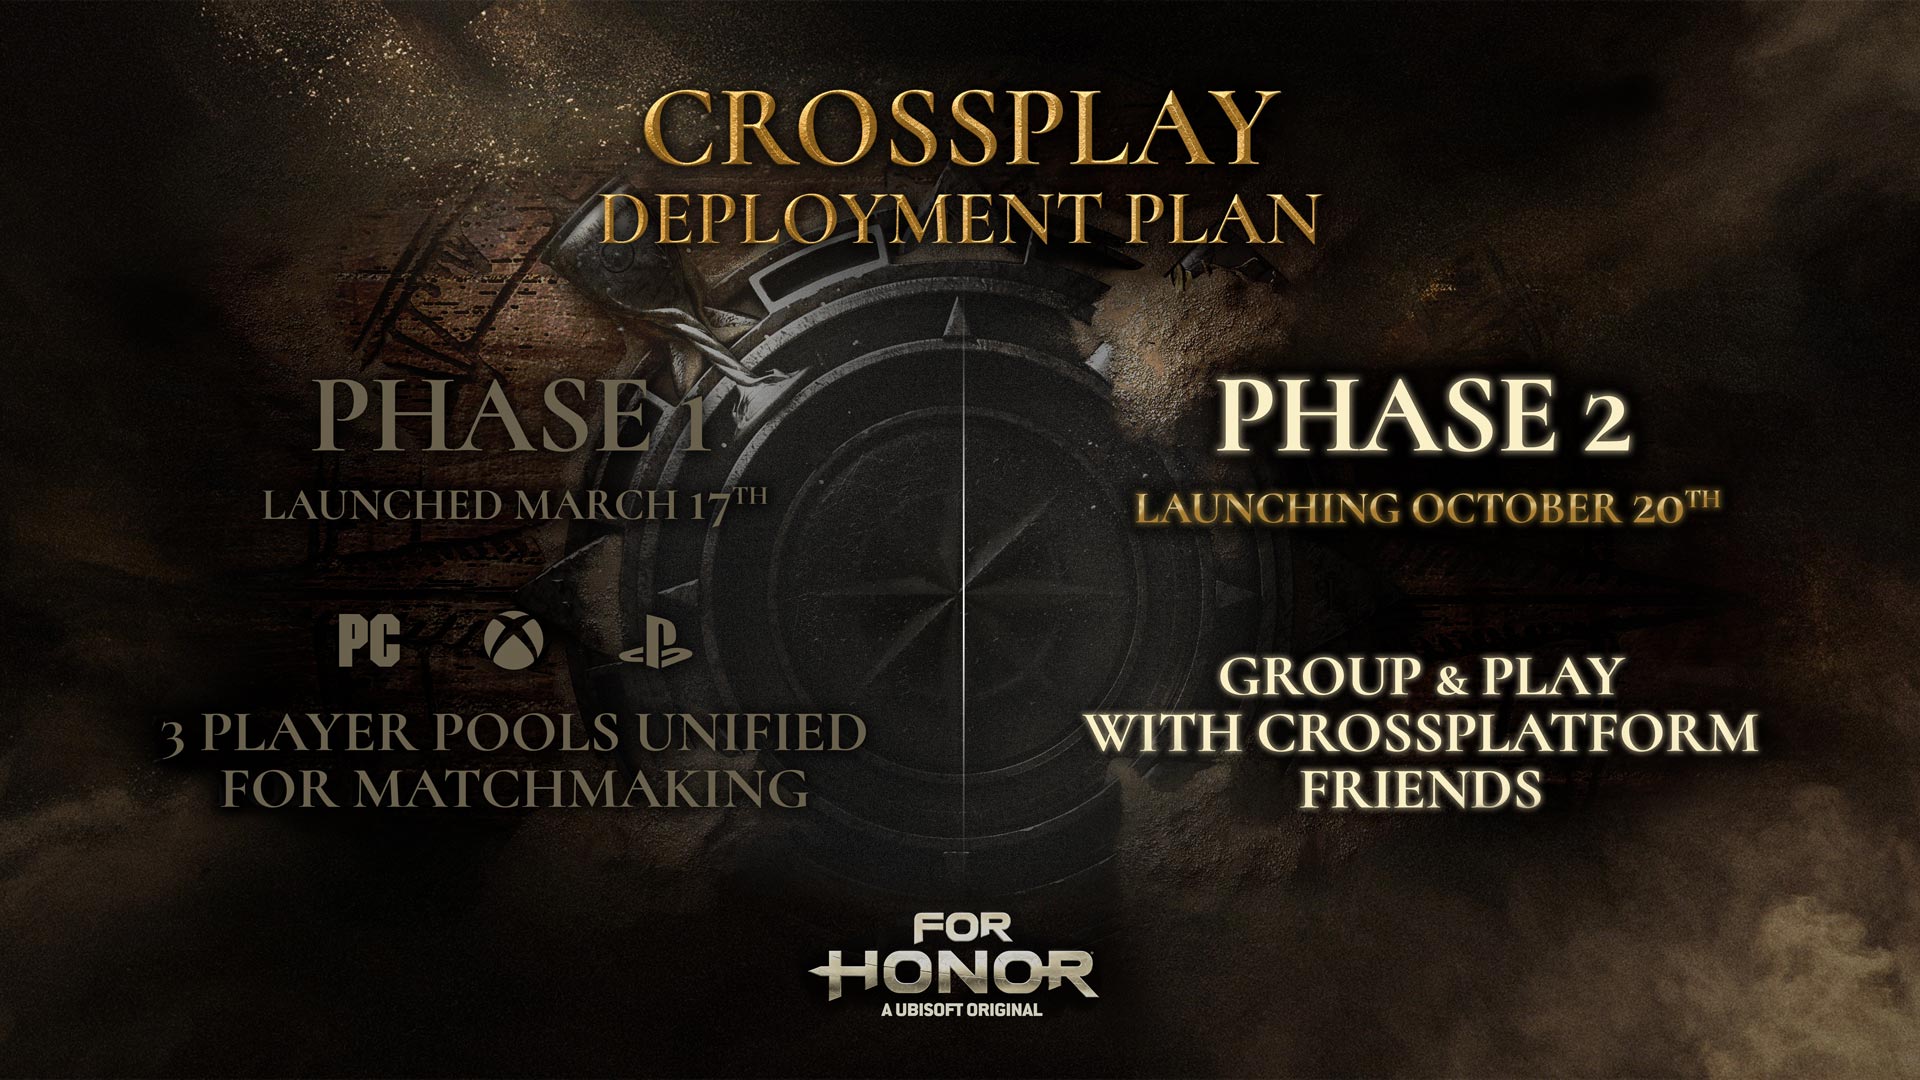 [FH] News - Crossplay Phase 2 - FHY6S3 crossplay phase 2 modified